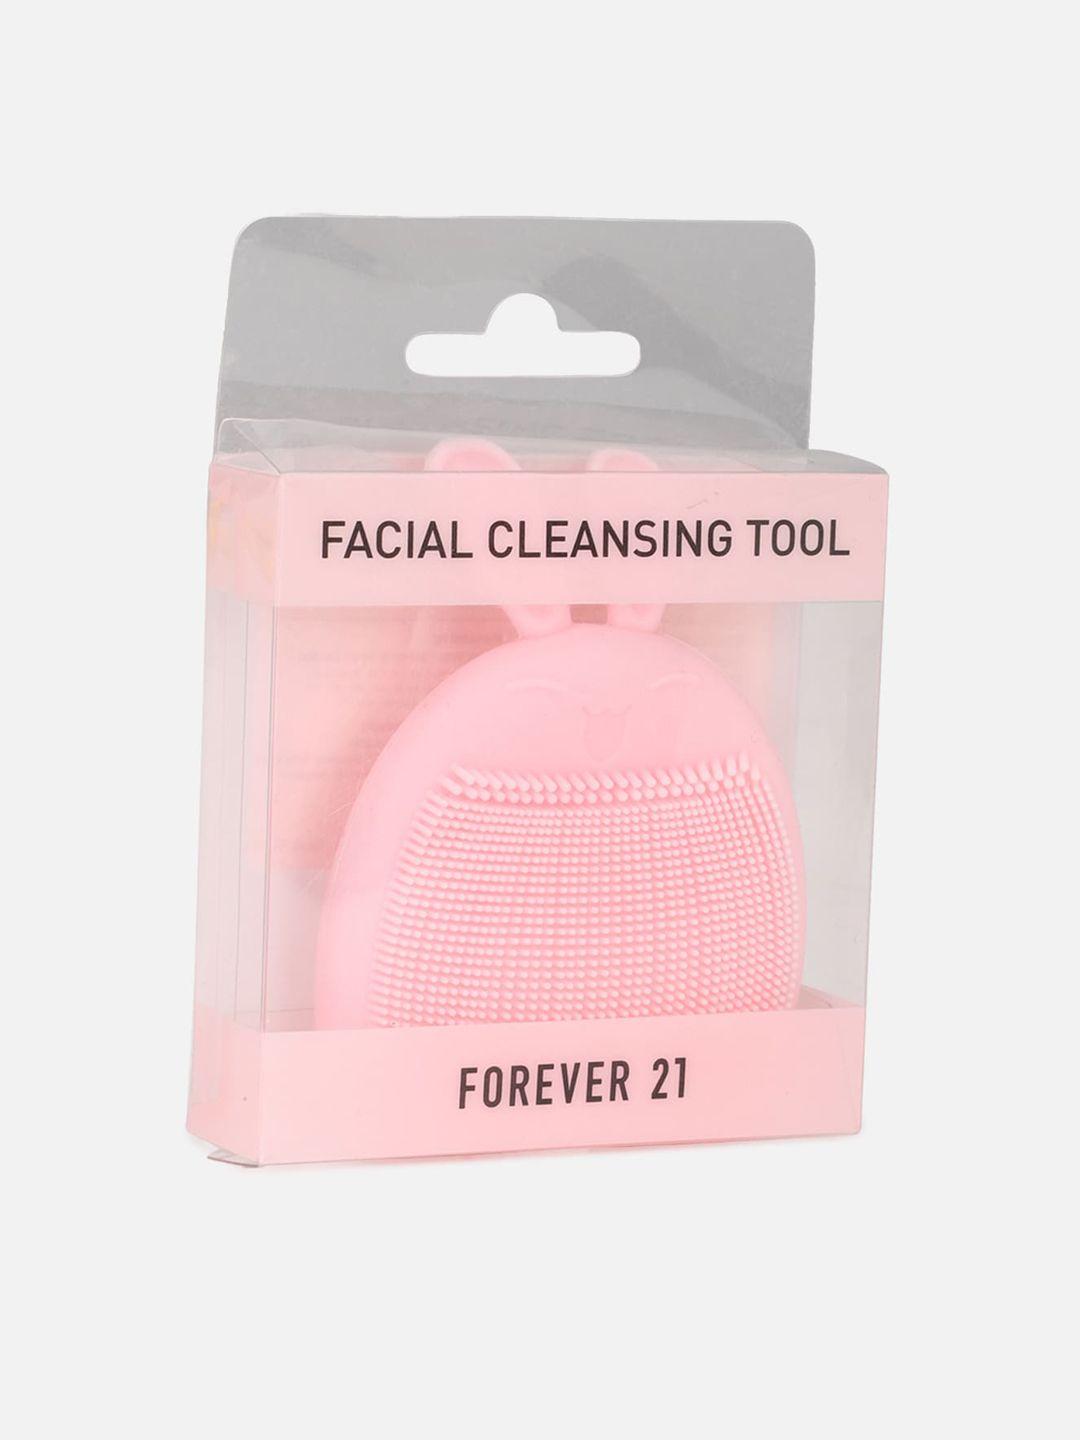 forever 21 facial cleansing tools